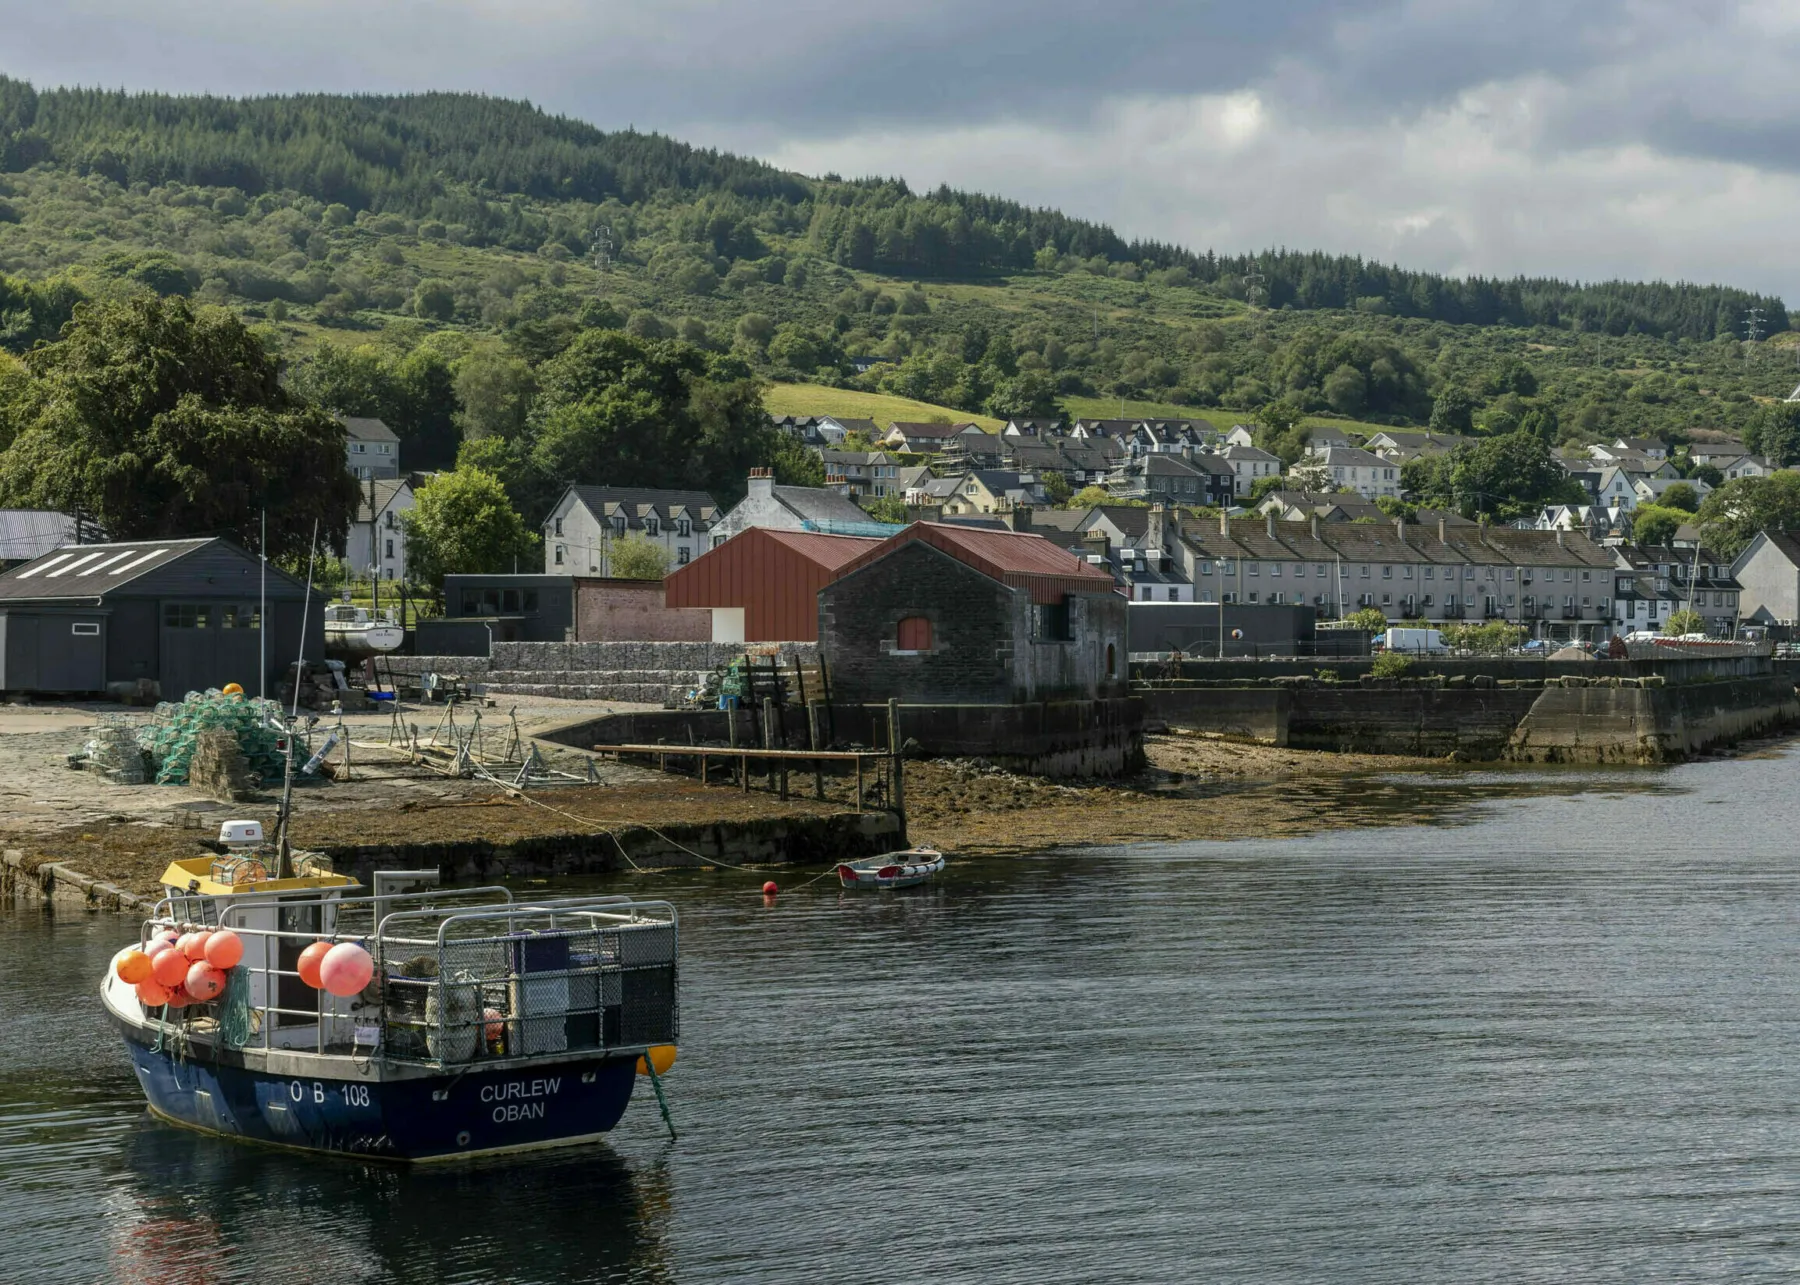 The pier and Egg Shed at Ardrishaig. In the foreground a small fishing boat, behind it the town and the Egg Shed by the shore - clearly visible with its rusty orange roof and cladding.